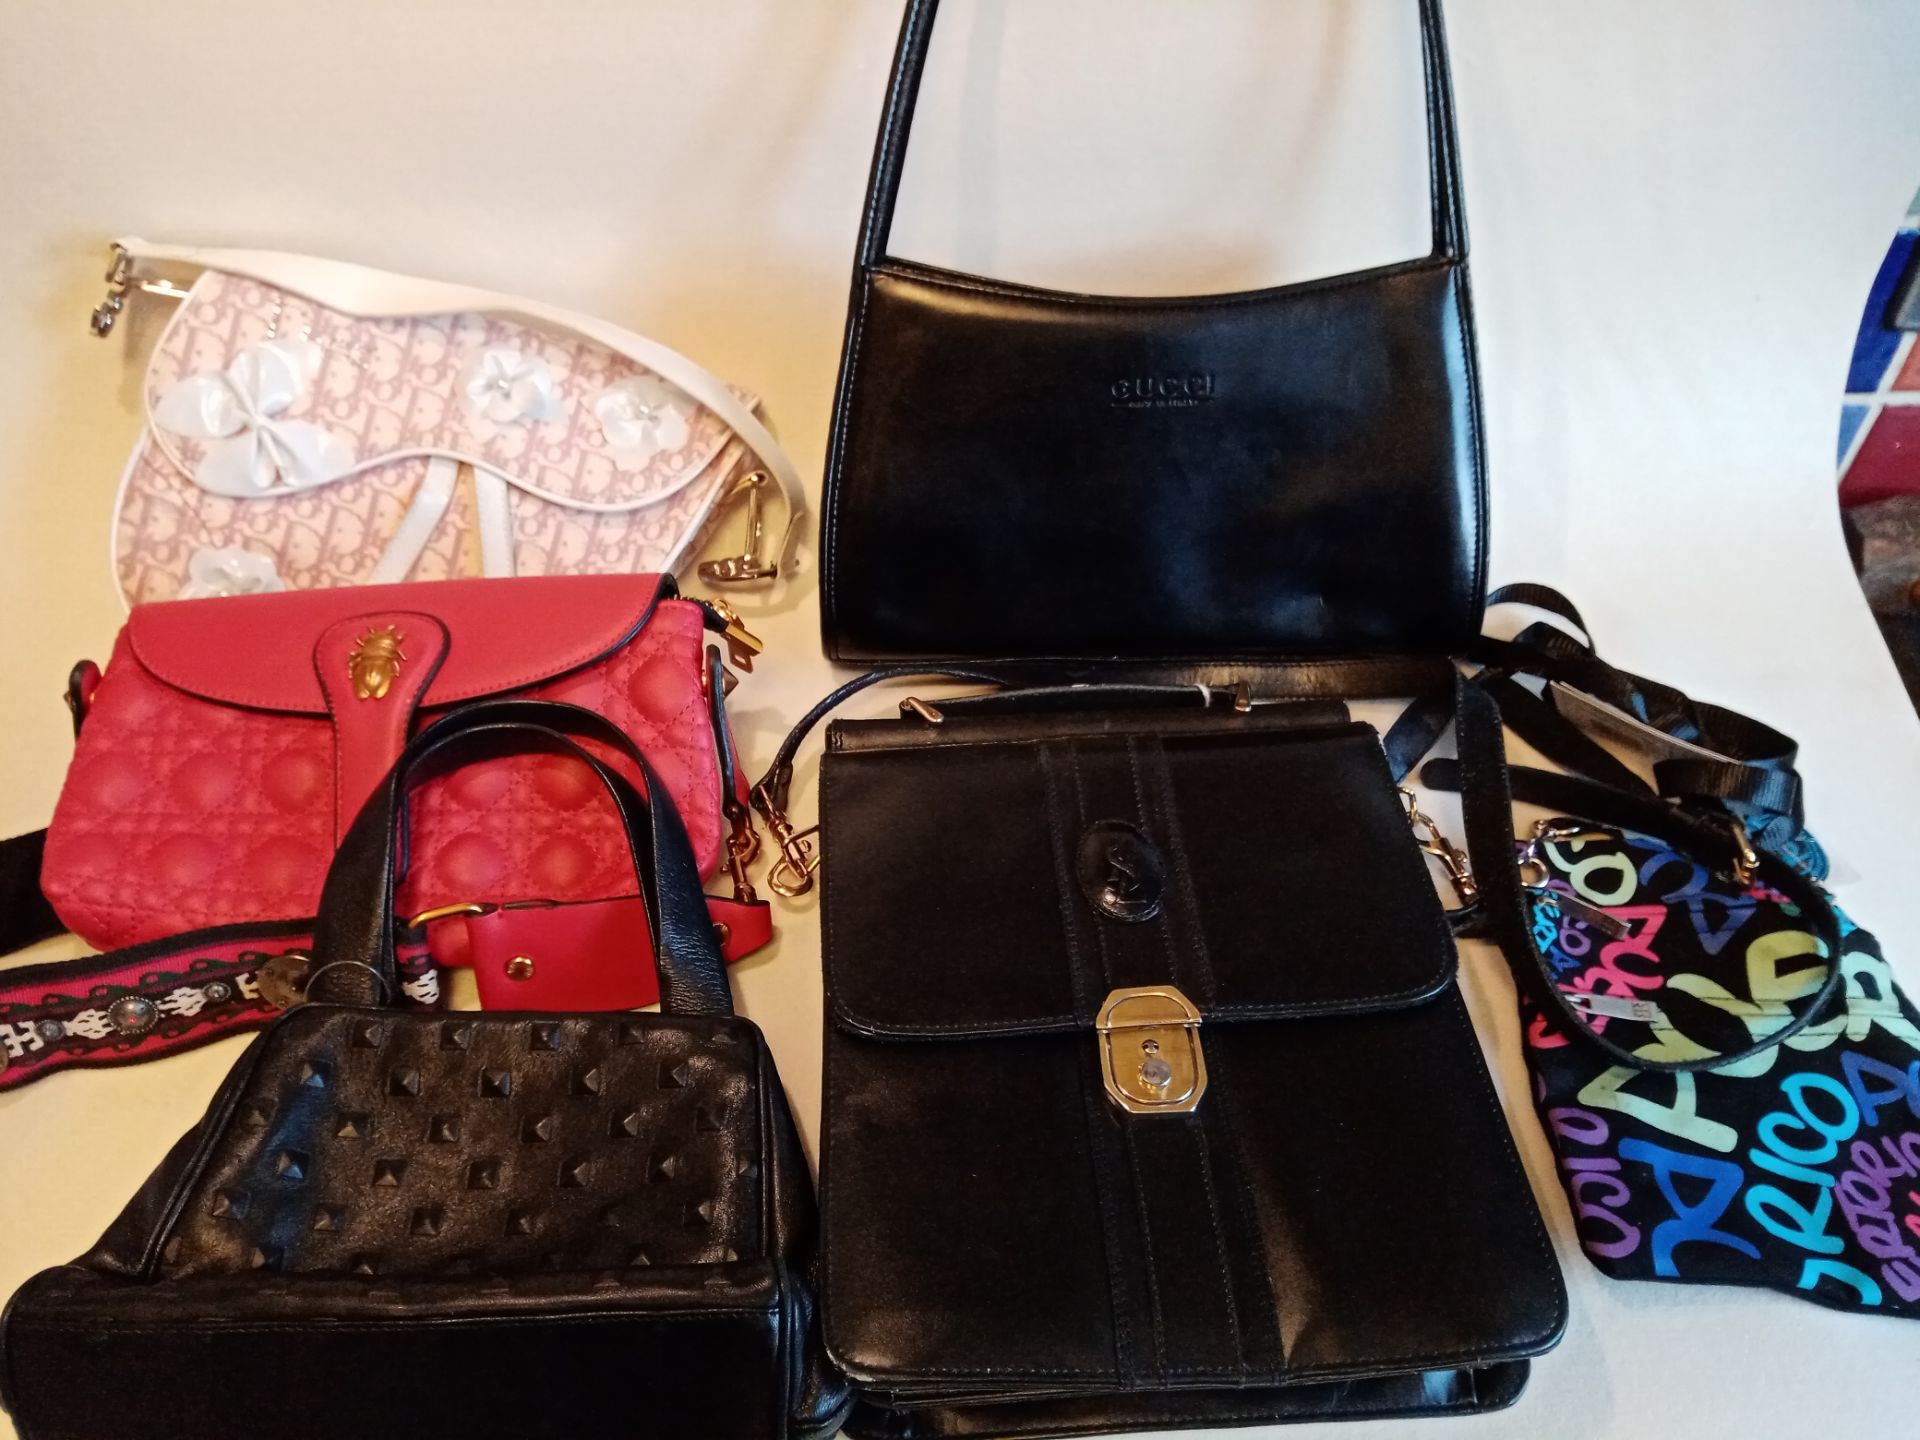 6 x Designer Hand Bags Including YSL and Dior - NO VAT ON THE HAMMER - CL607 - Location: Leeds1 x